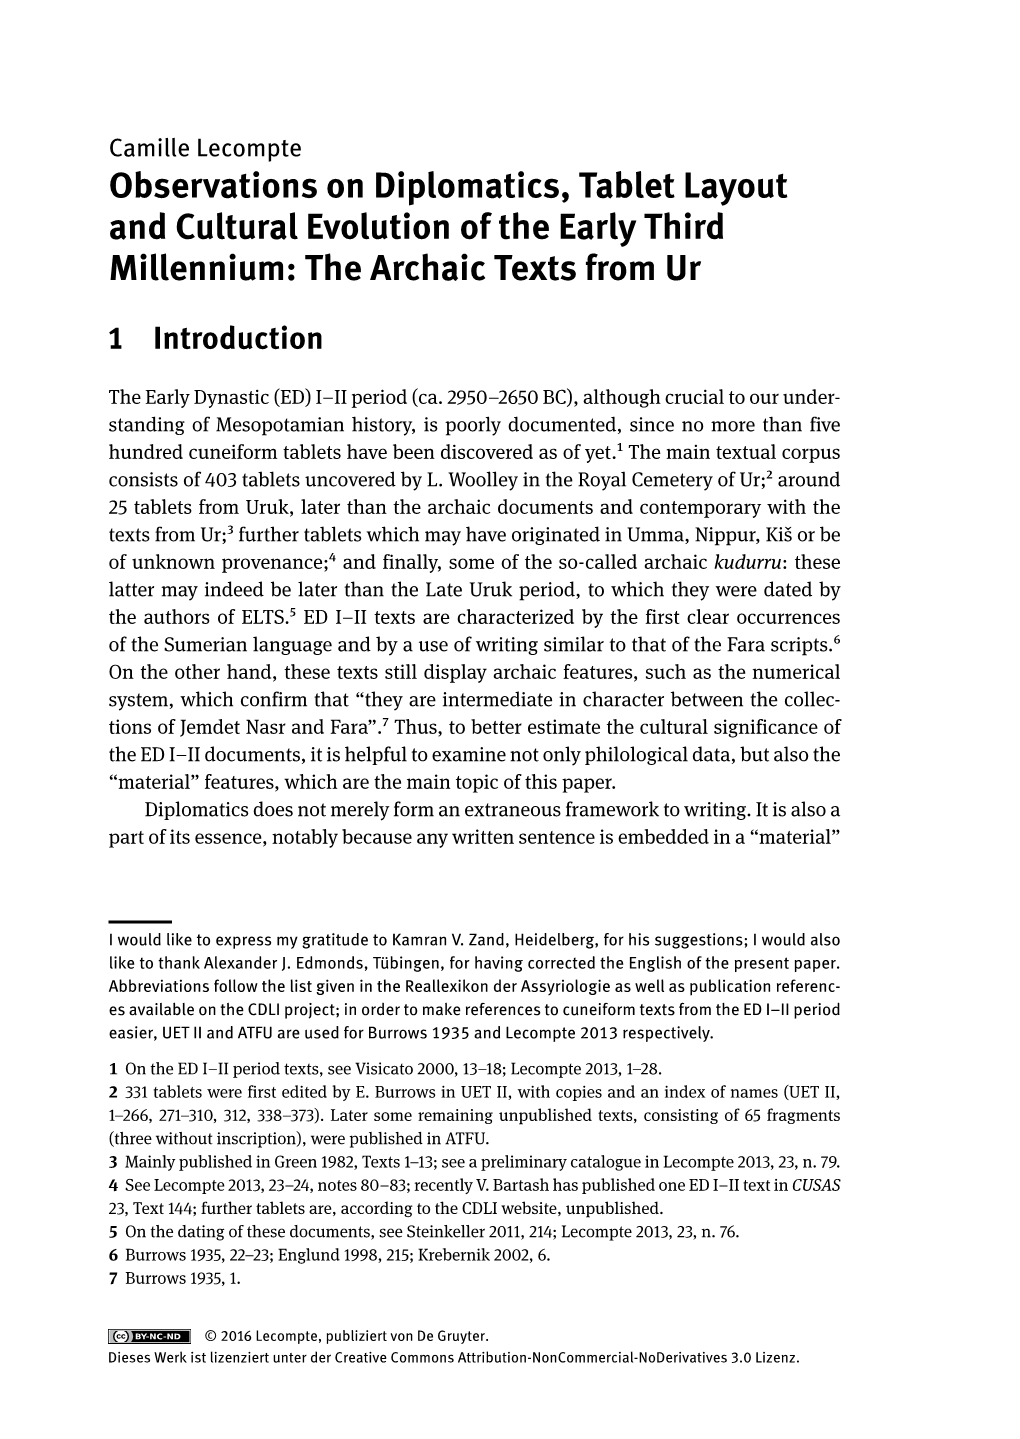 Observations on Diplomatics, Tablet Layout and Cultural Evolution of the Early Third Millennium: the Archaic Texts from Ur